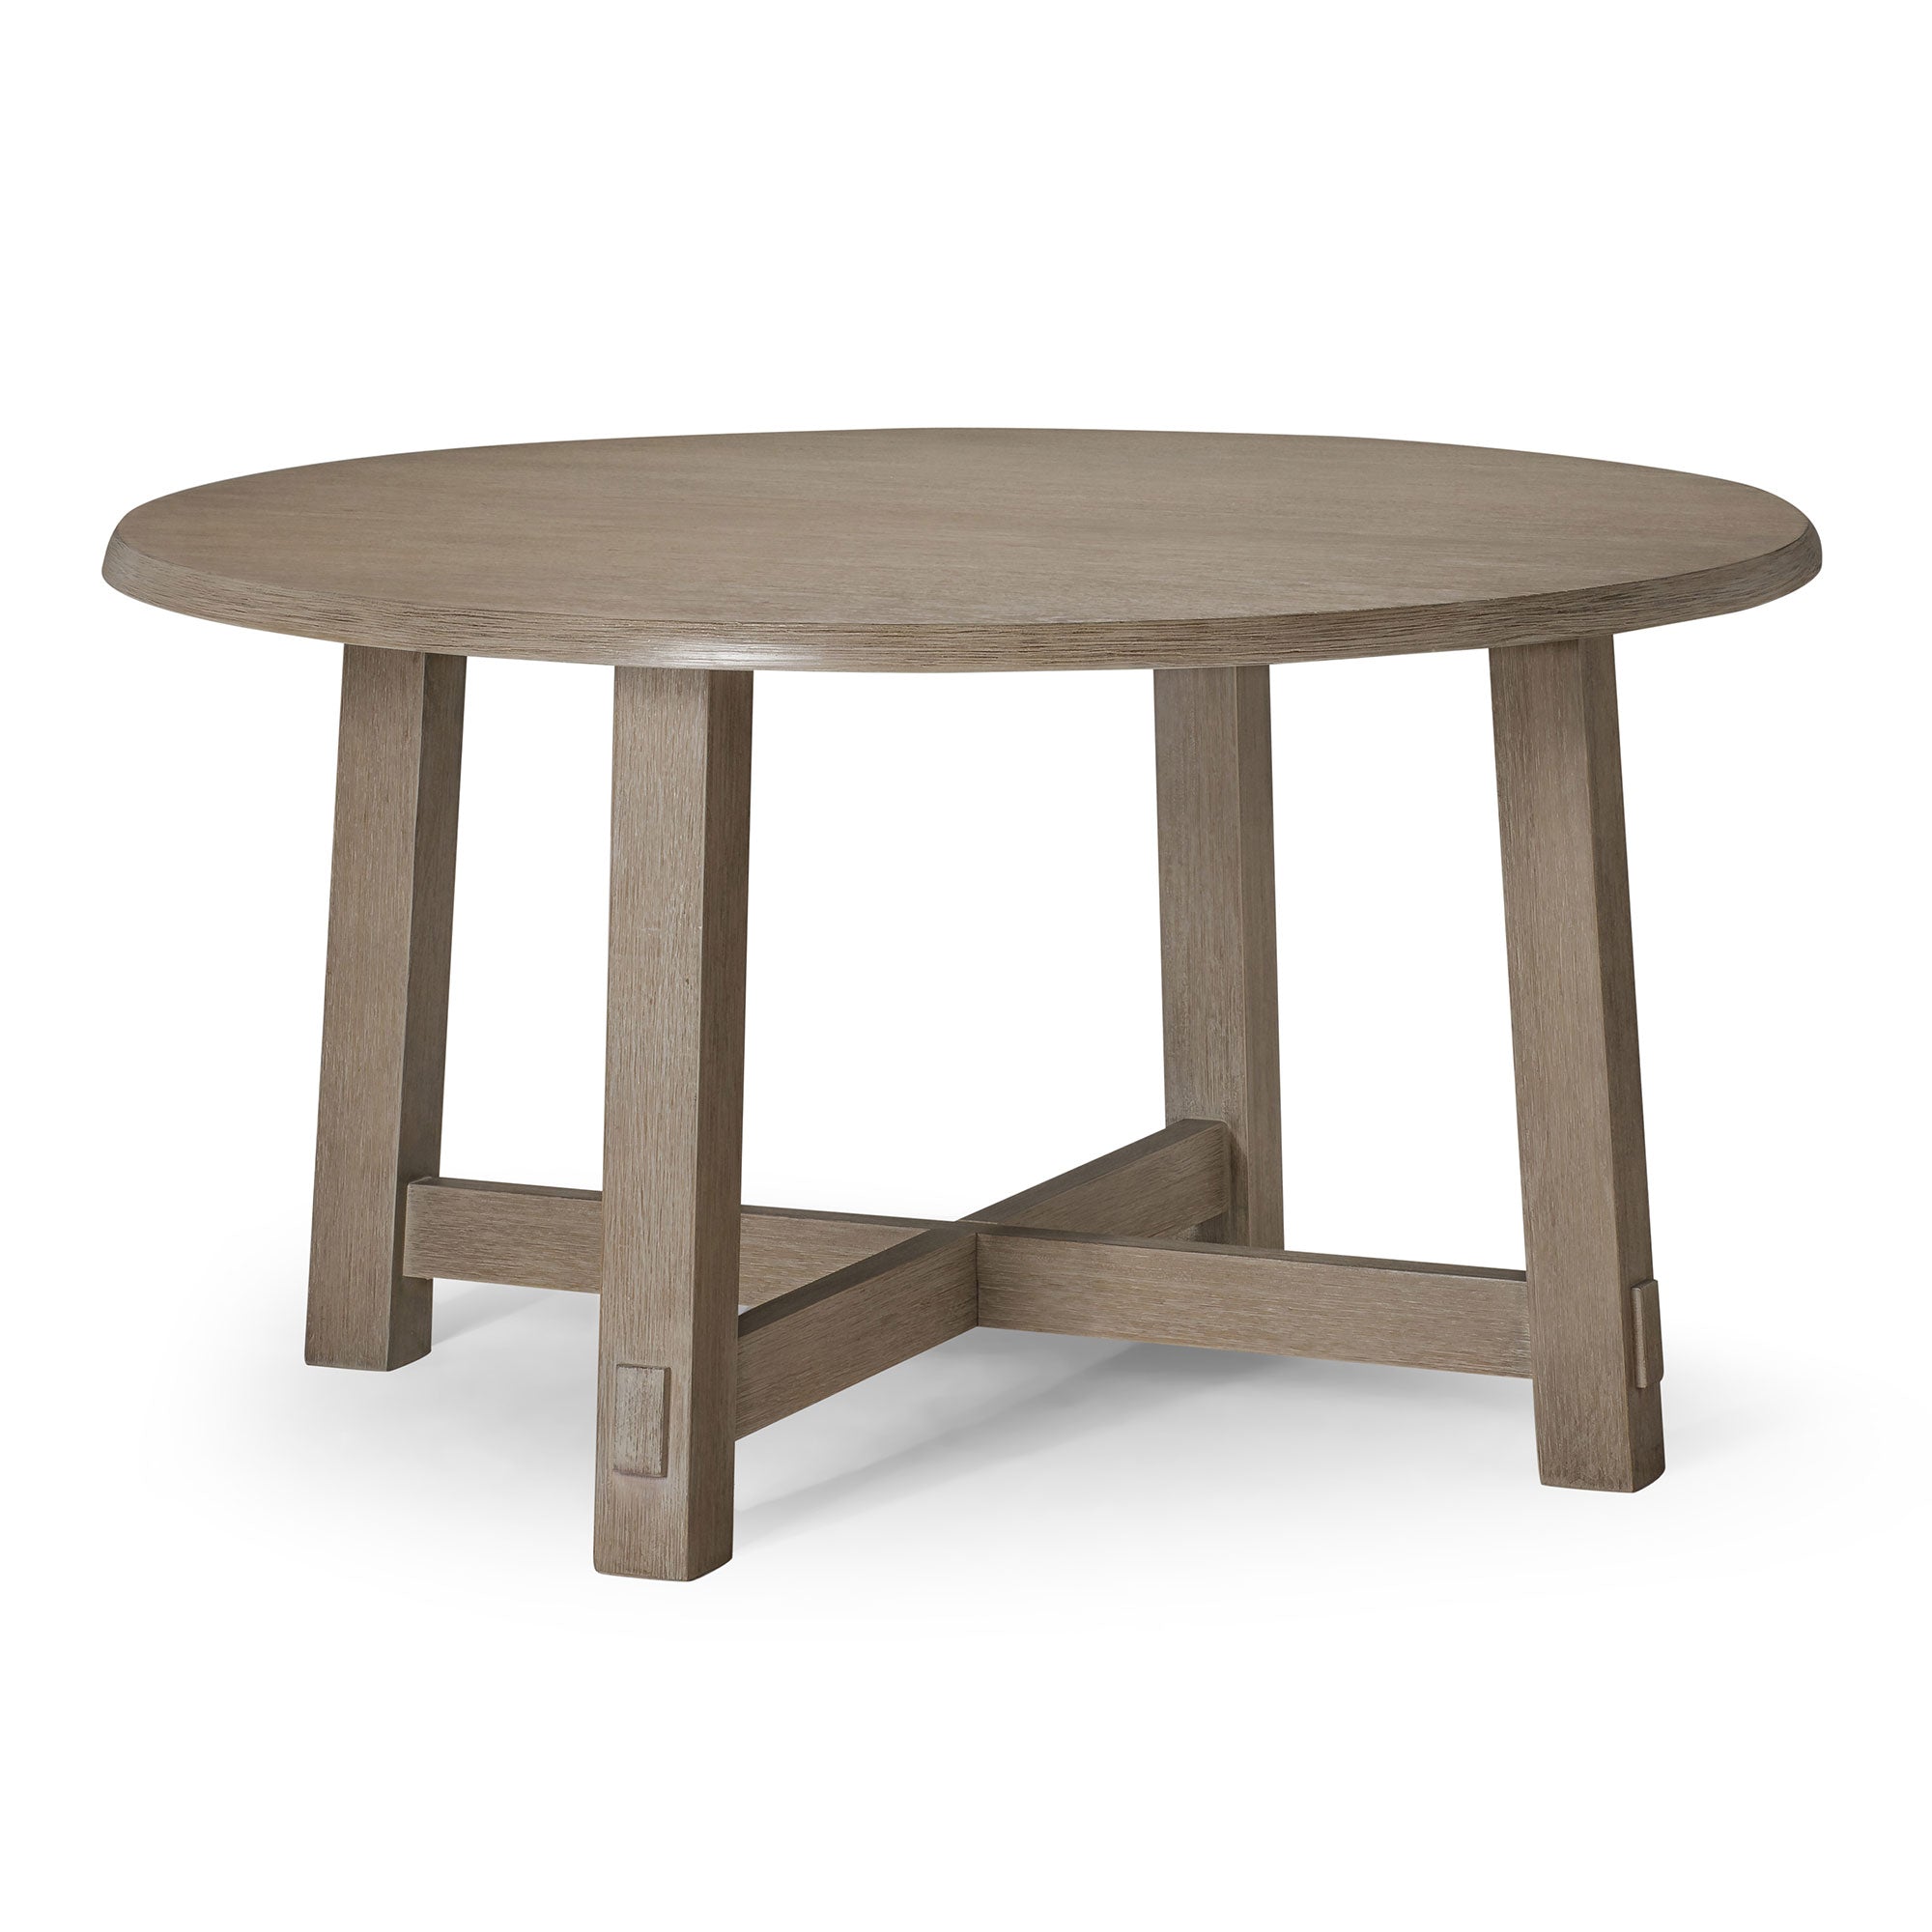 Maven-Lane-Sasha-Round-Wooden-Dining-Table-in-Weathered-Grey-Finish-Kitchen-&-Dining-Room-Tables